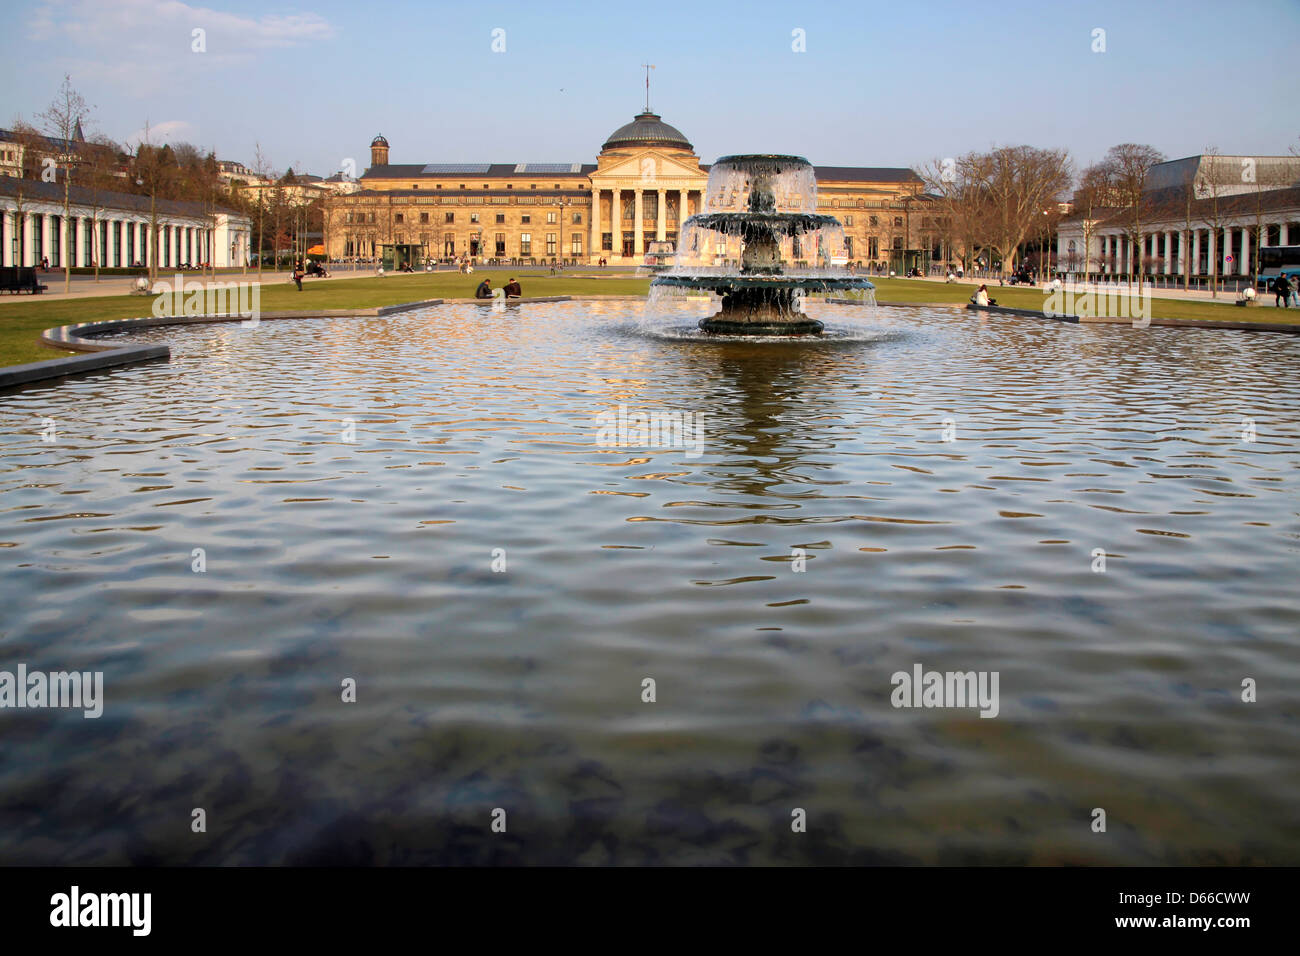 Spa house and fountain in Wiesbaden, Hesse, Germany Stock Photo